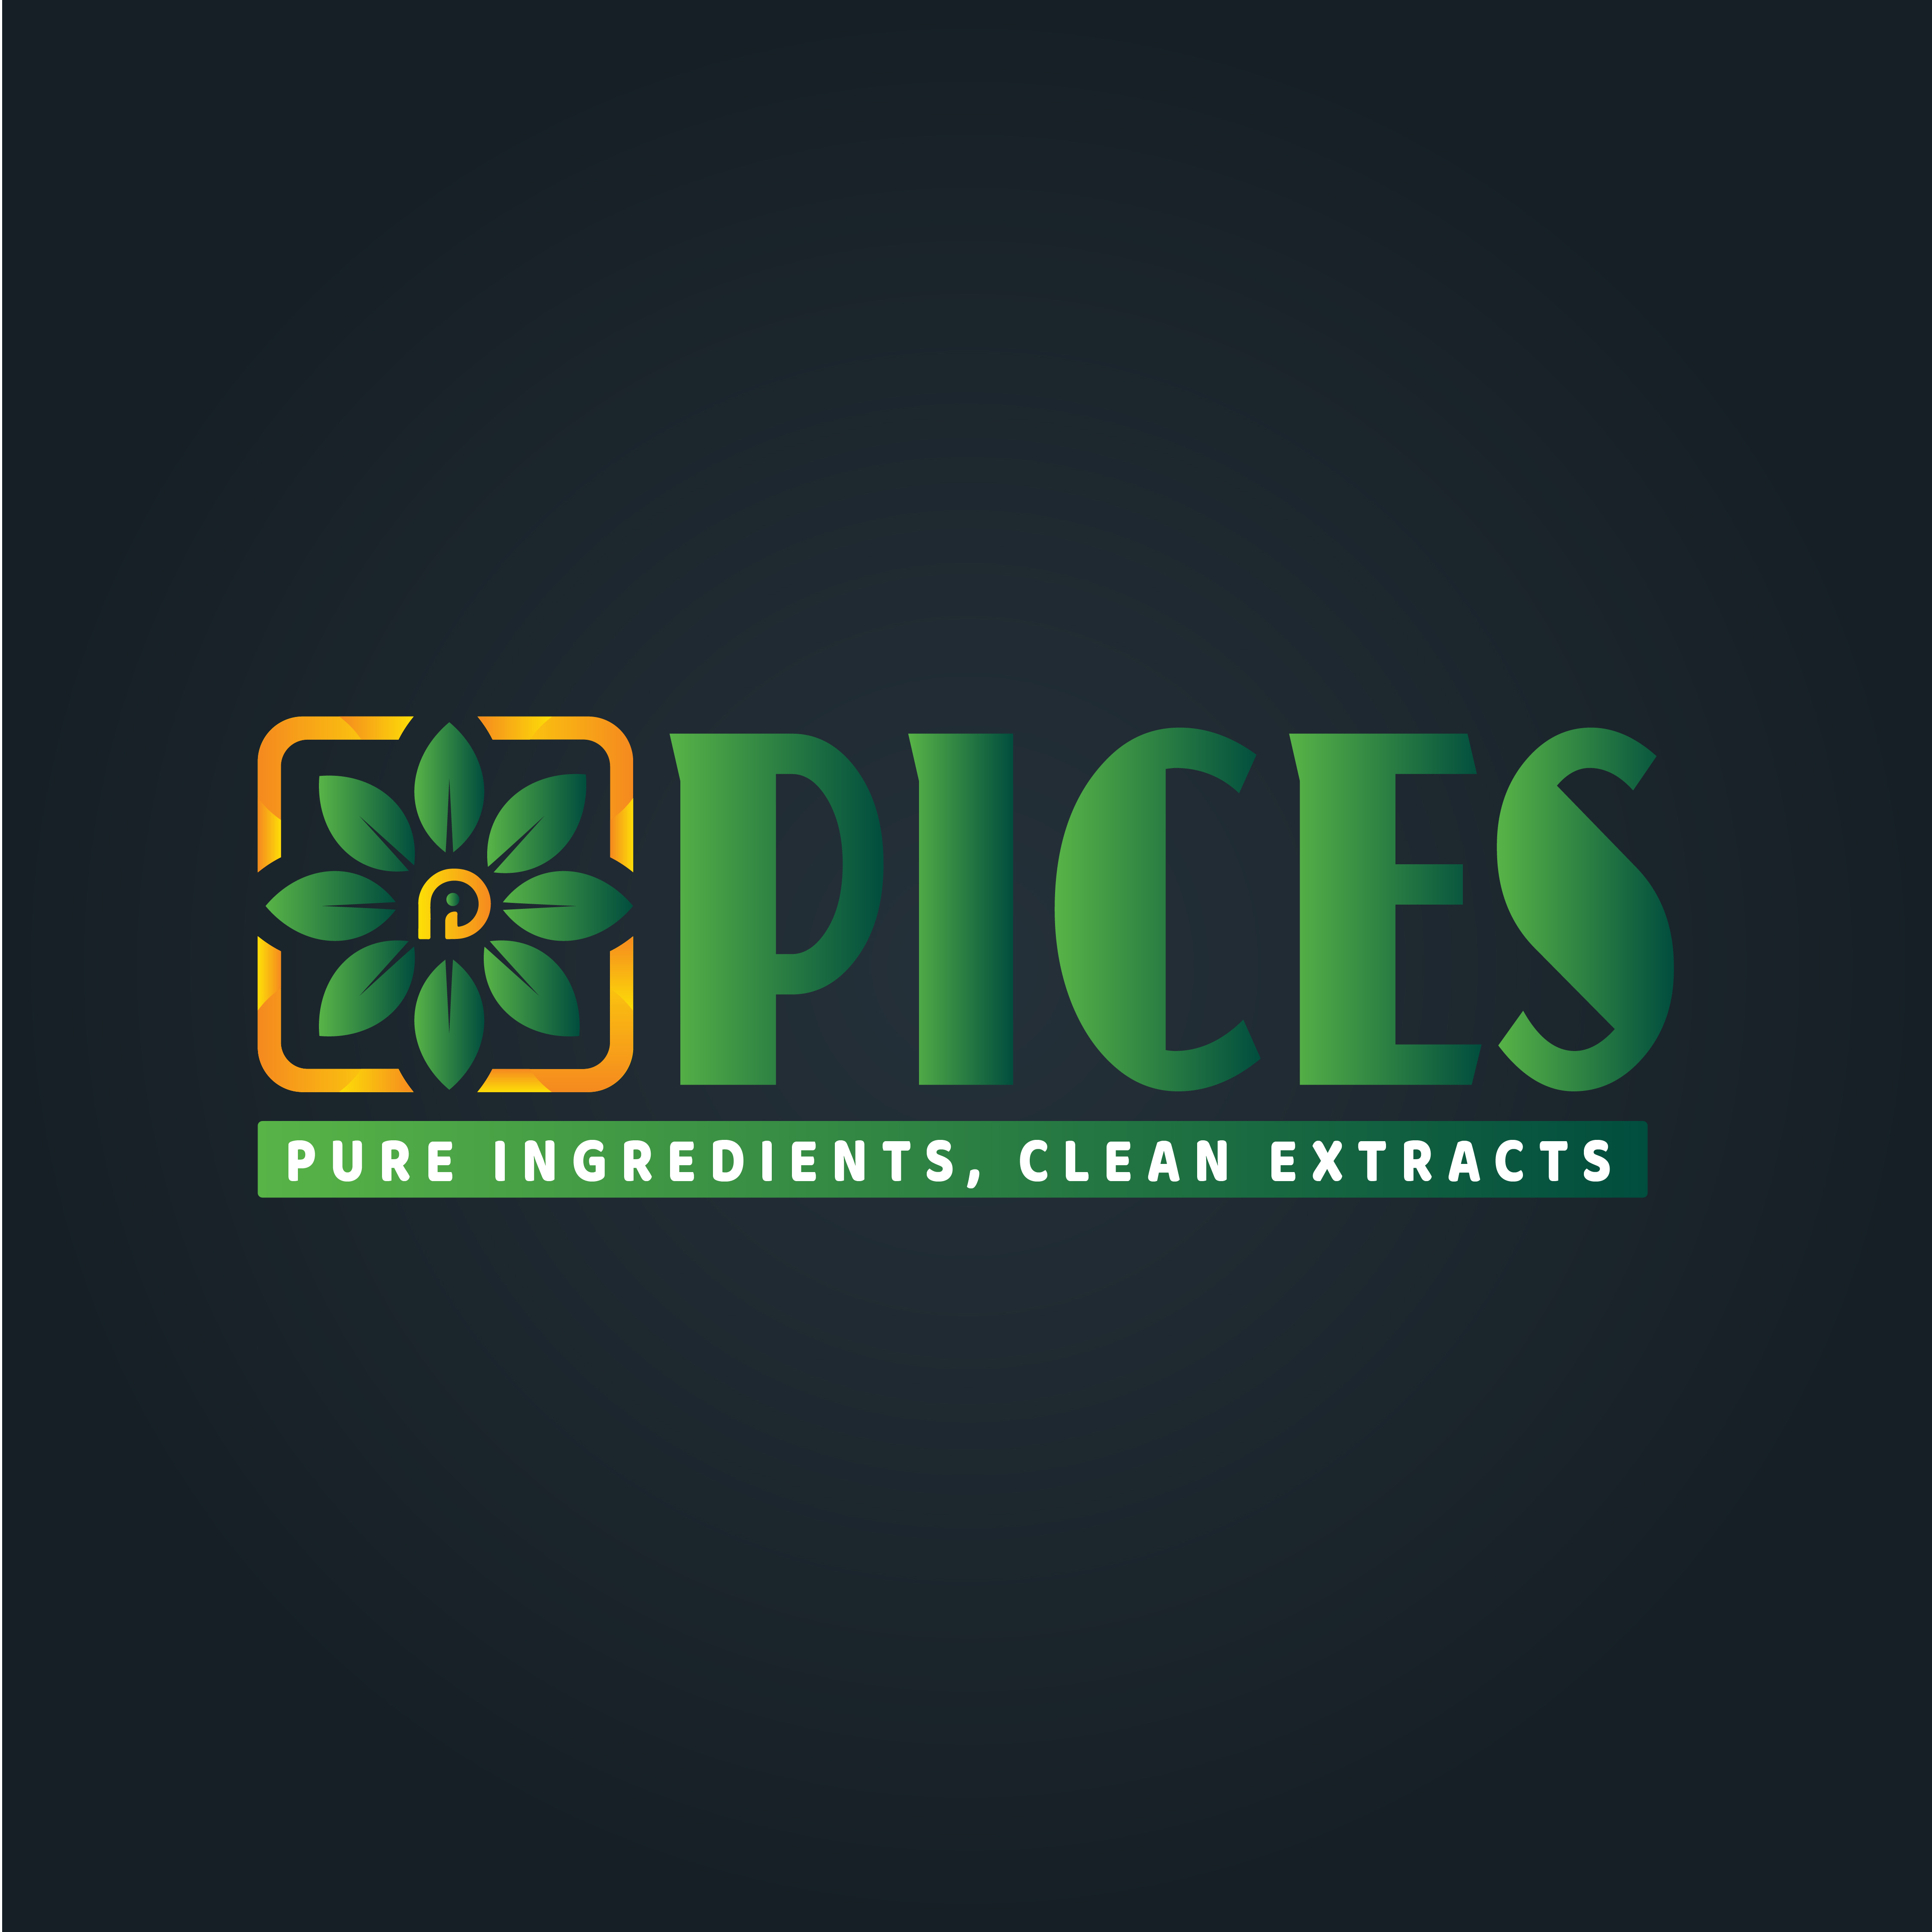 Pices Ingredients and Extracts Pvt Ltd